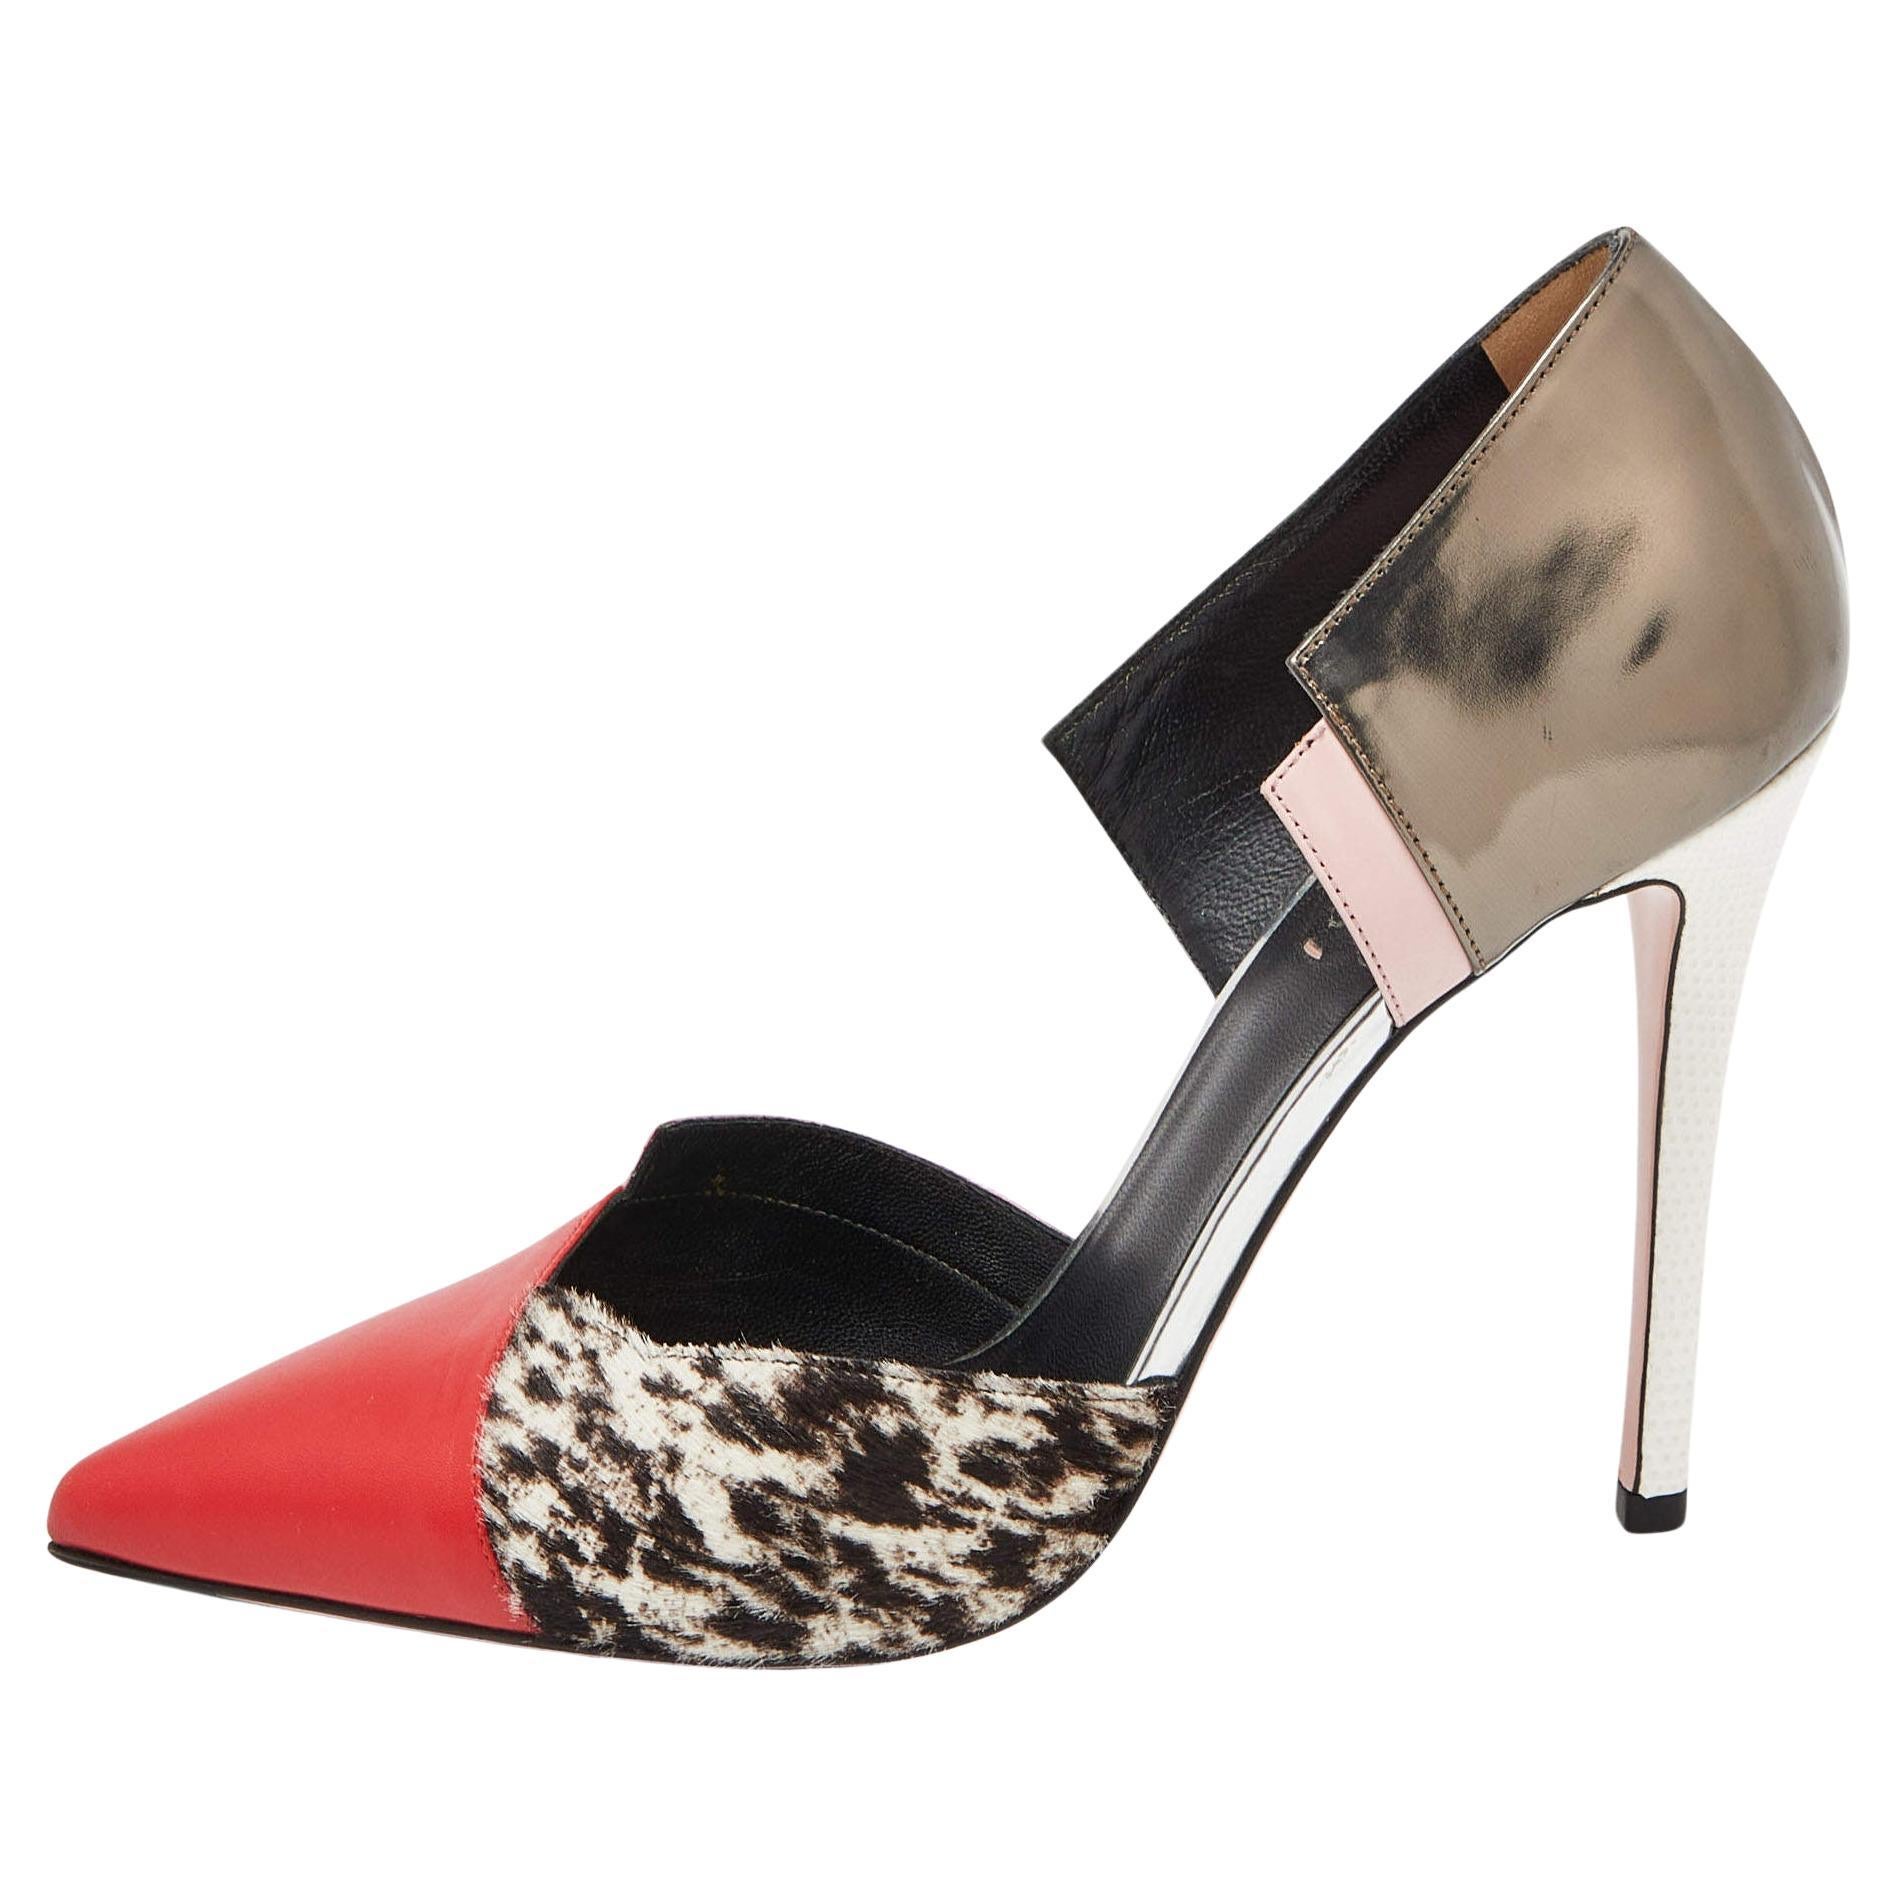 Fendi Multicolor Calfhair, Leather and Patent Trim Pointed Toe Pumps Size 39 For Sale